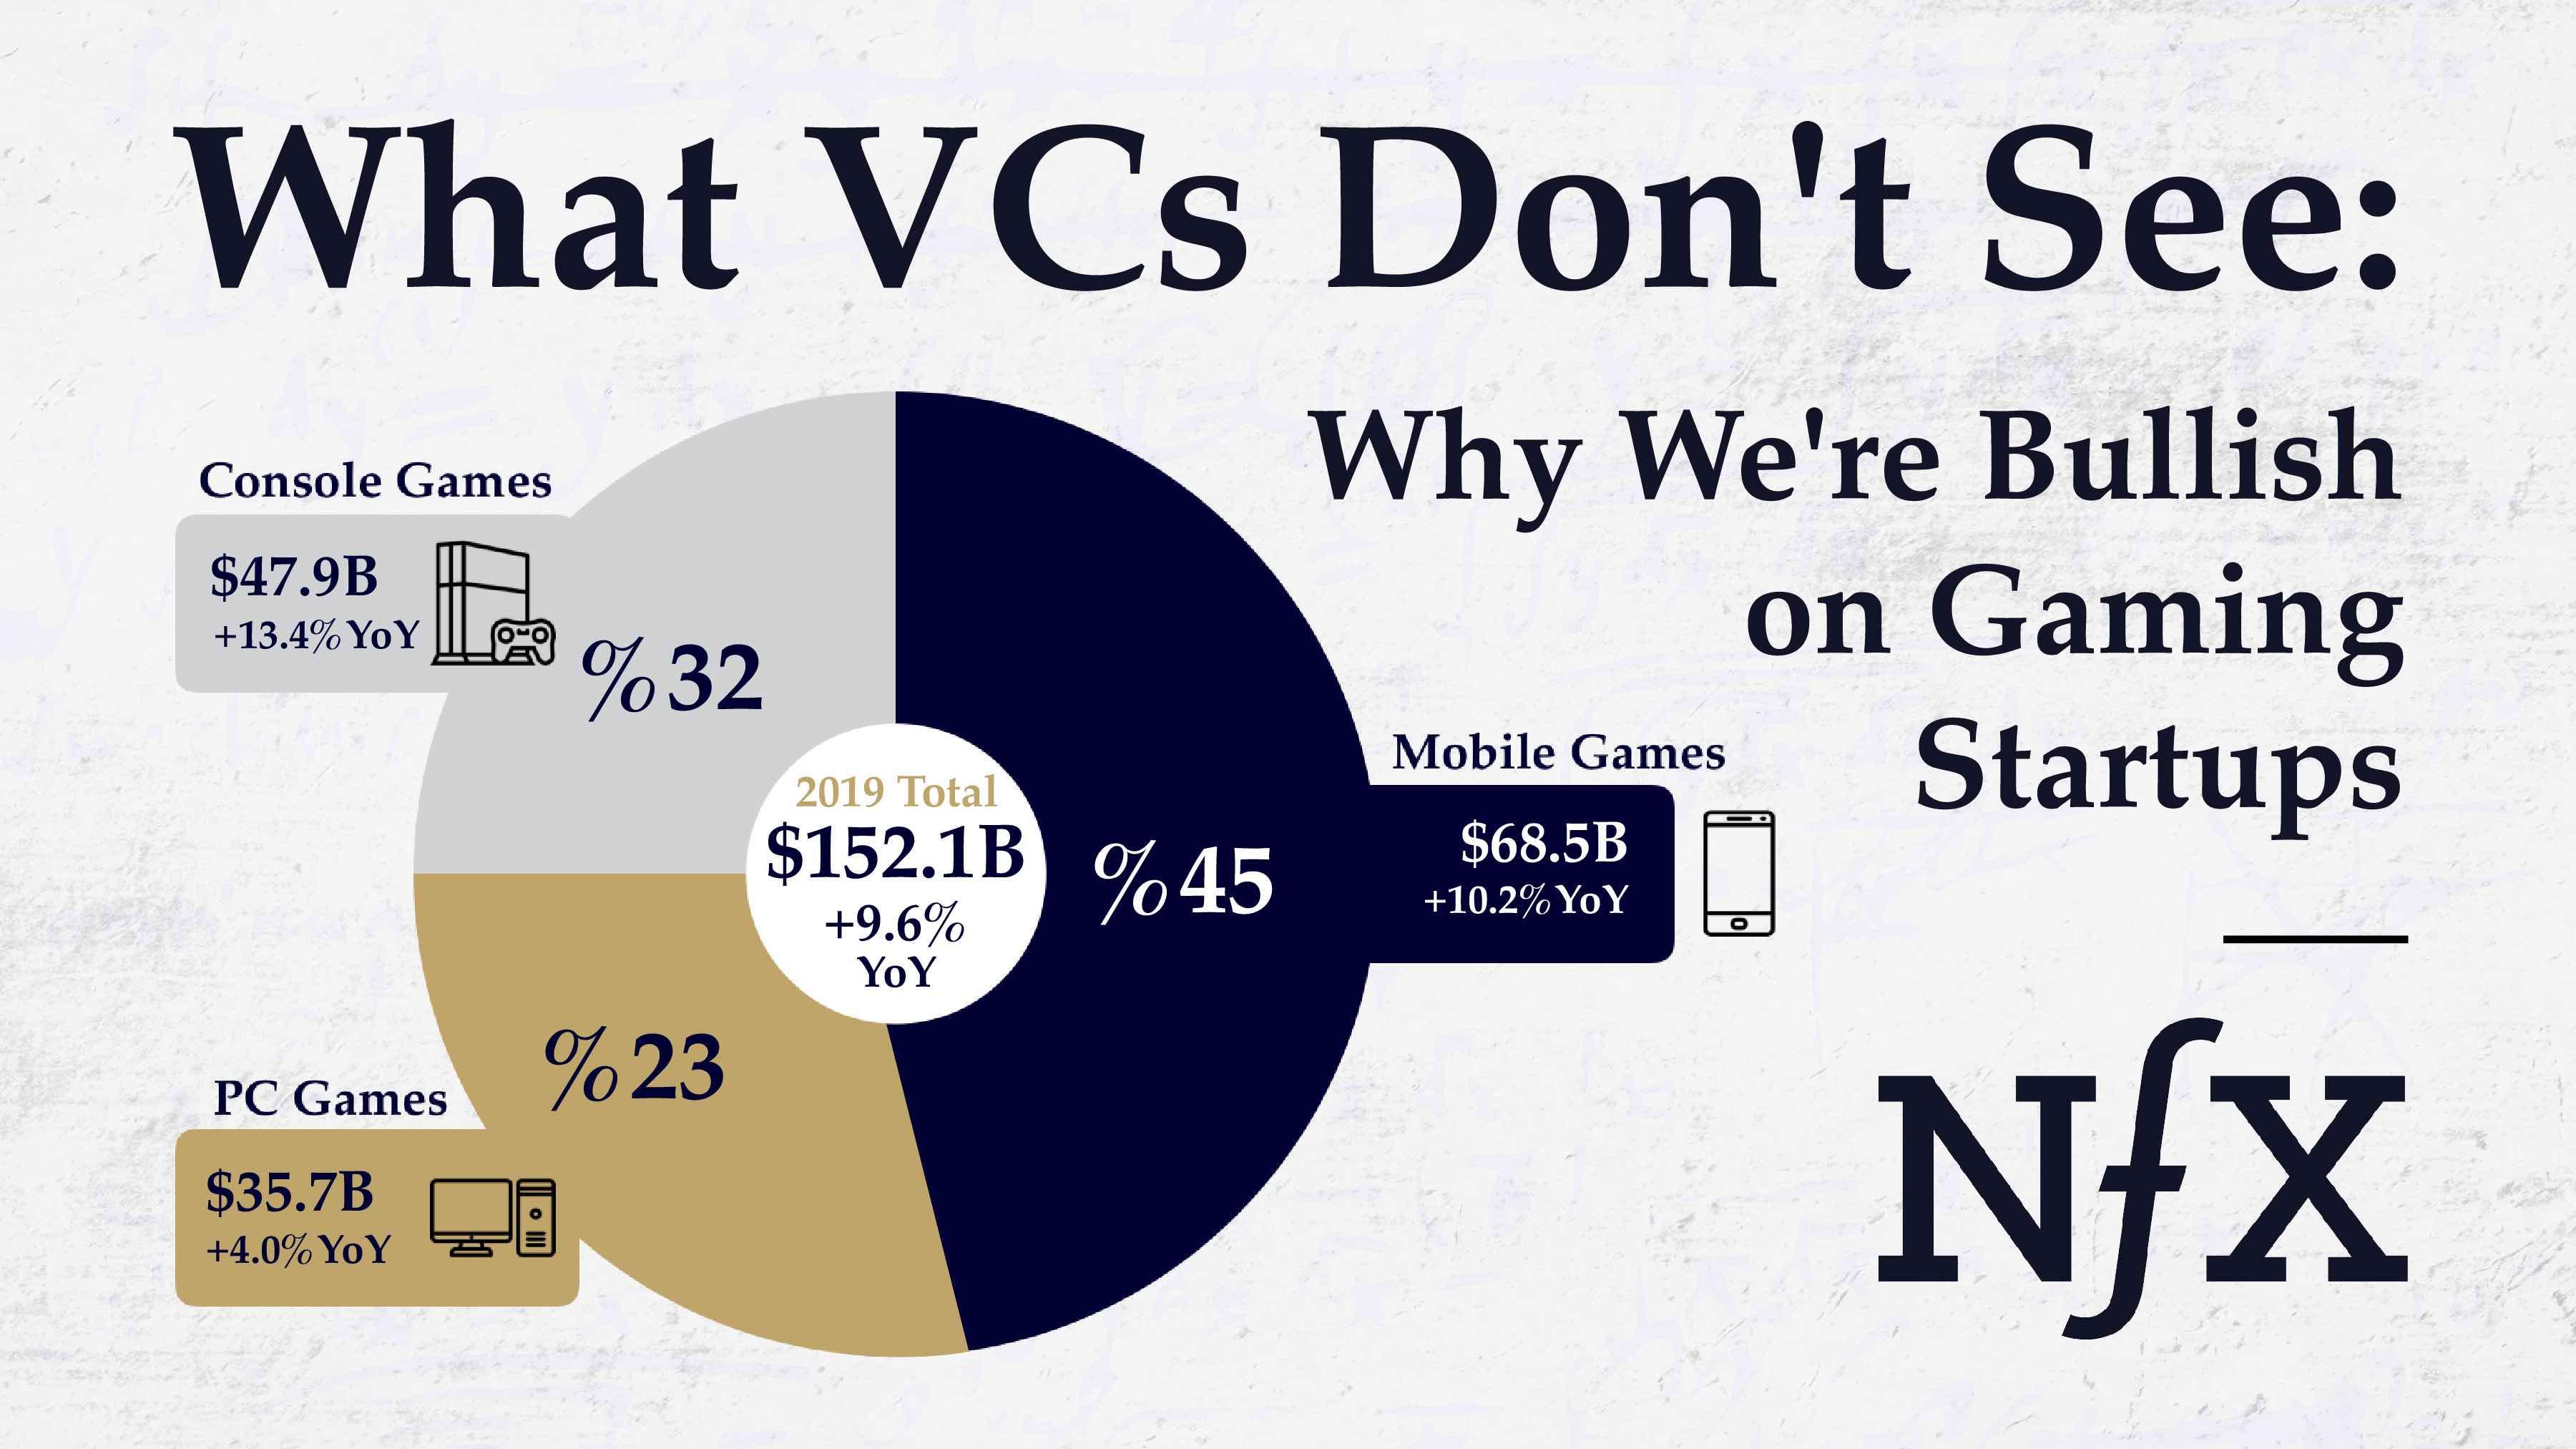 What VCs Don’t See: Why We’re Bullish on Gaming Startups